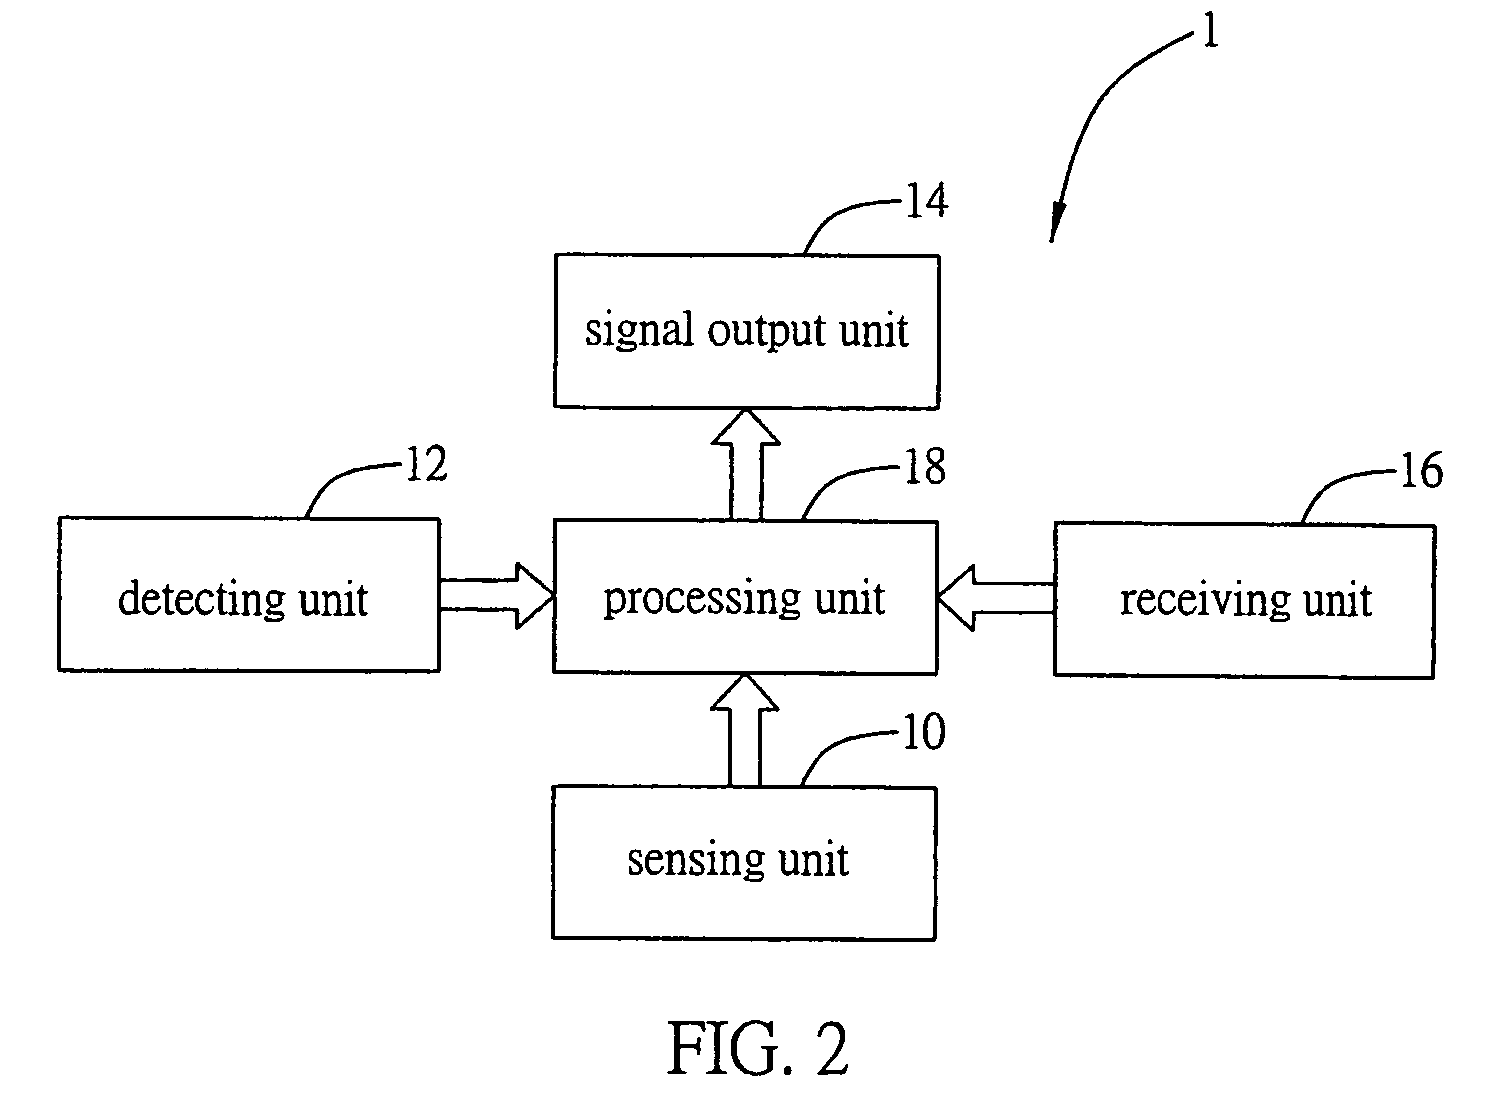 Method and system for charging management